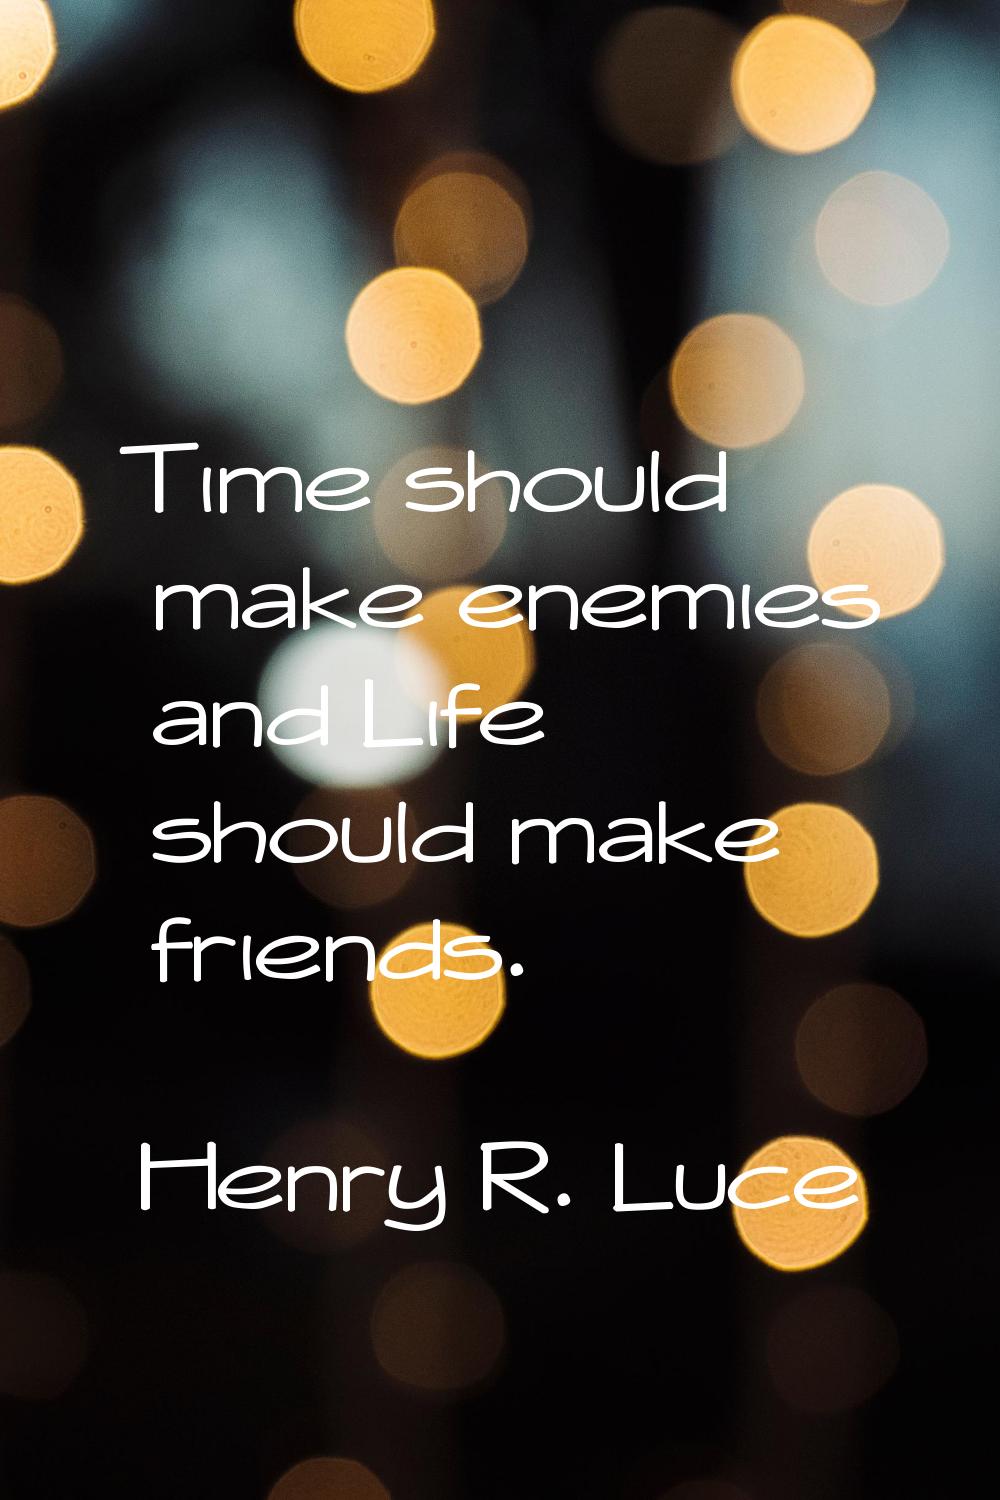 Time should make enemies and Life should make friends.